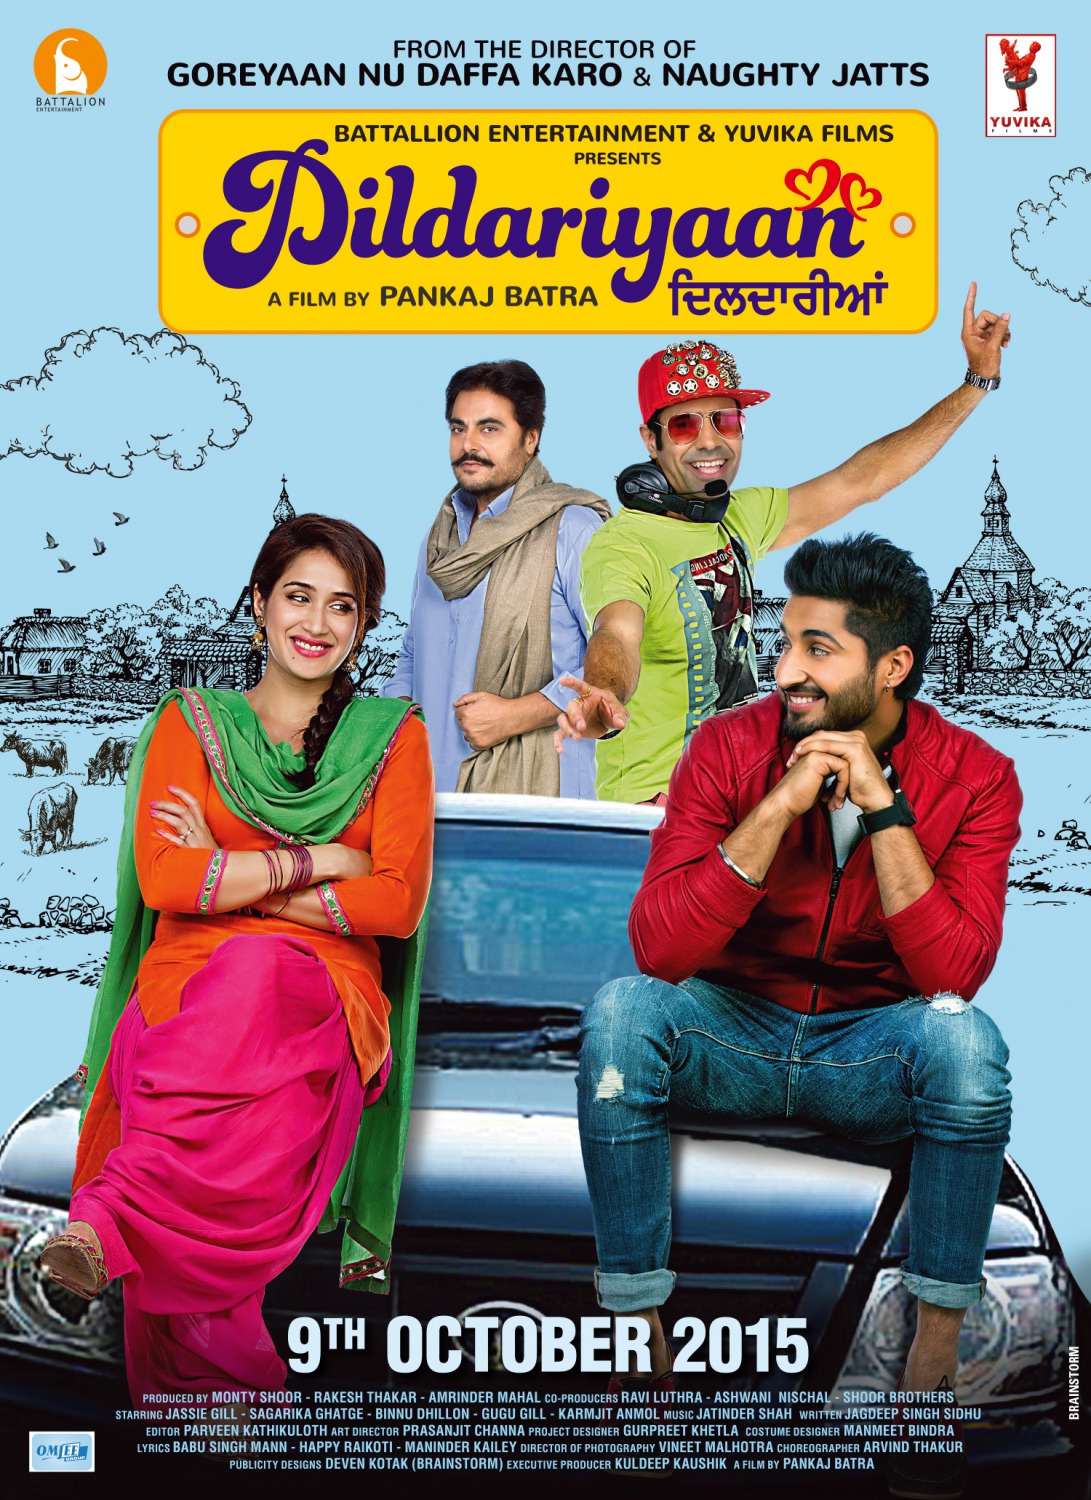 Extra Large Movie Poster Image for Dildariyaan (#4 of 4)